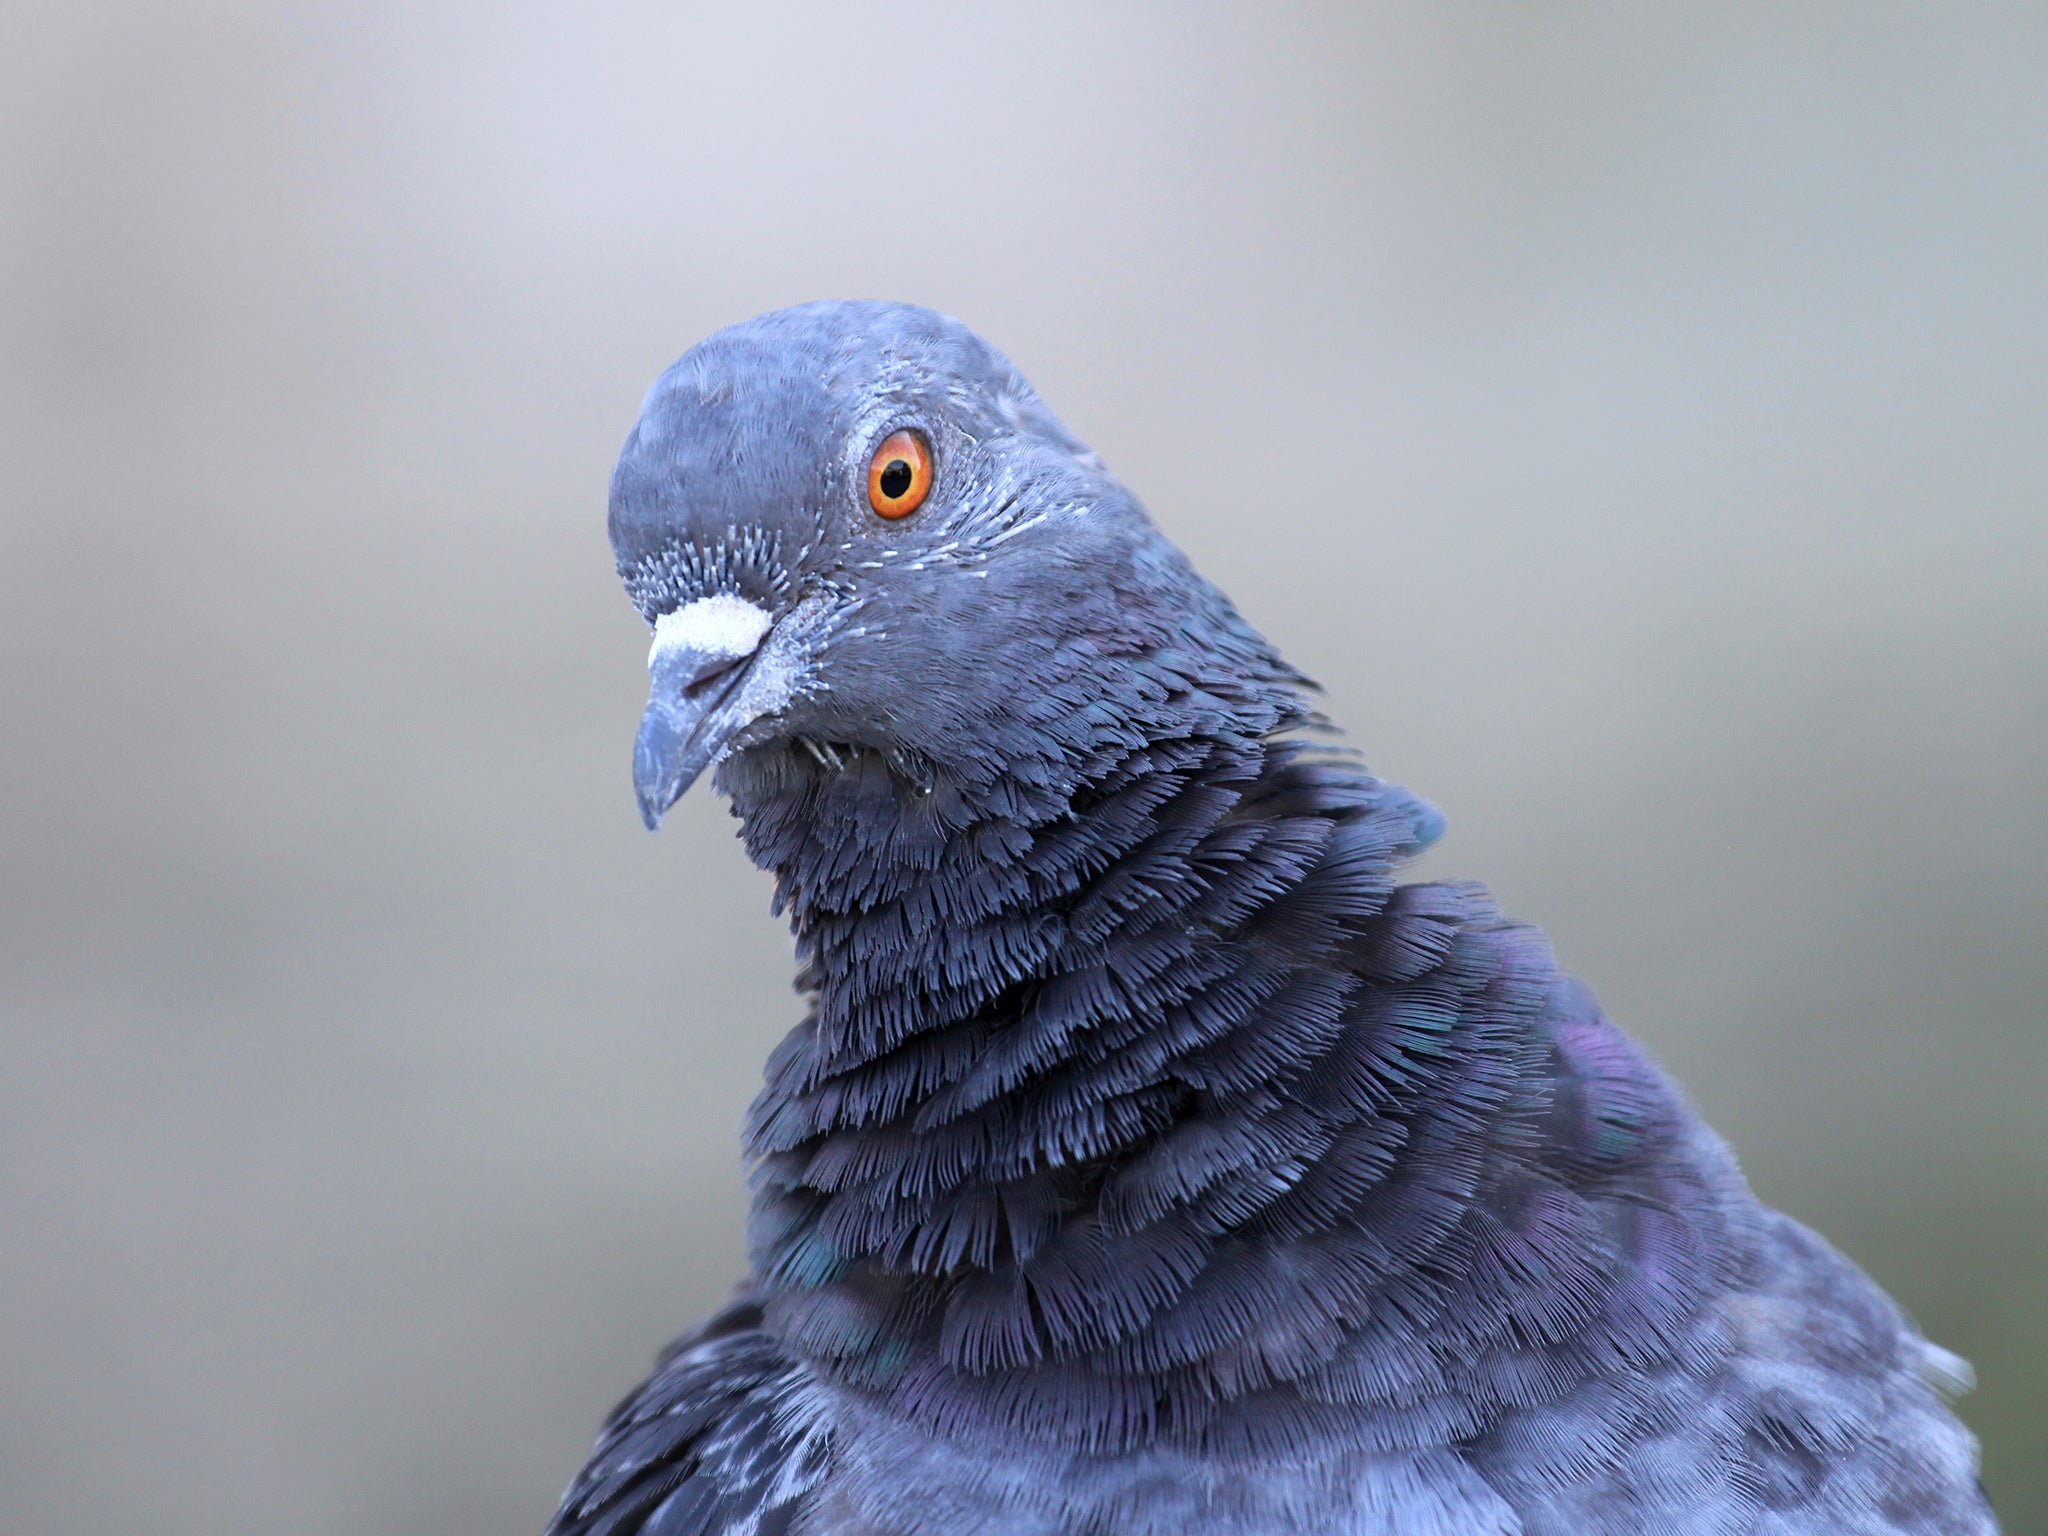 It is not the first time India has taken pigeons thought to be from Pakistan into custody